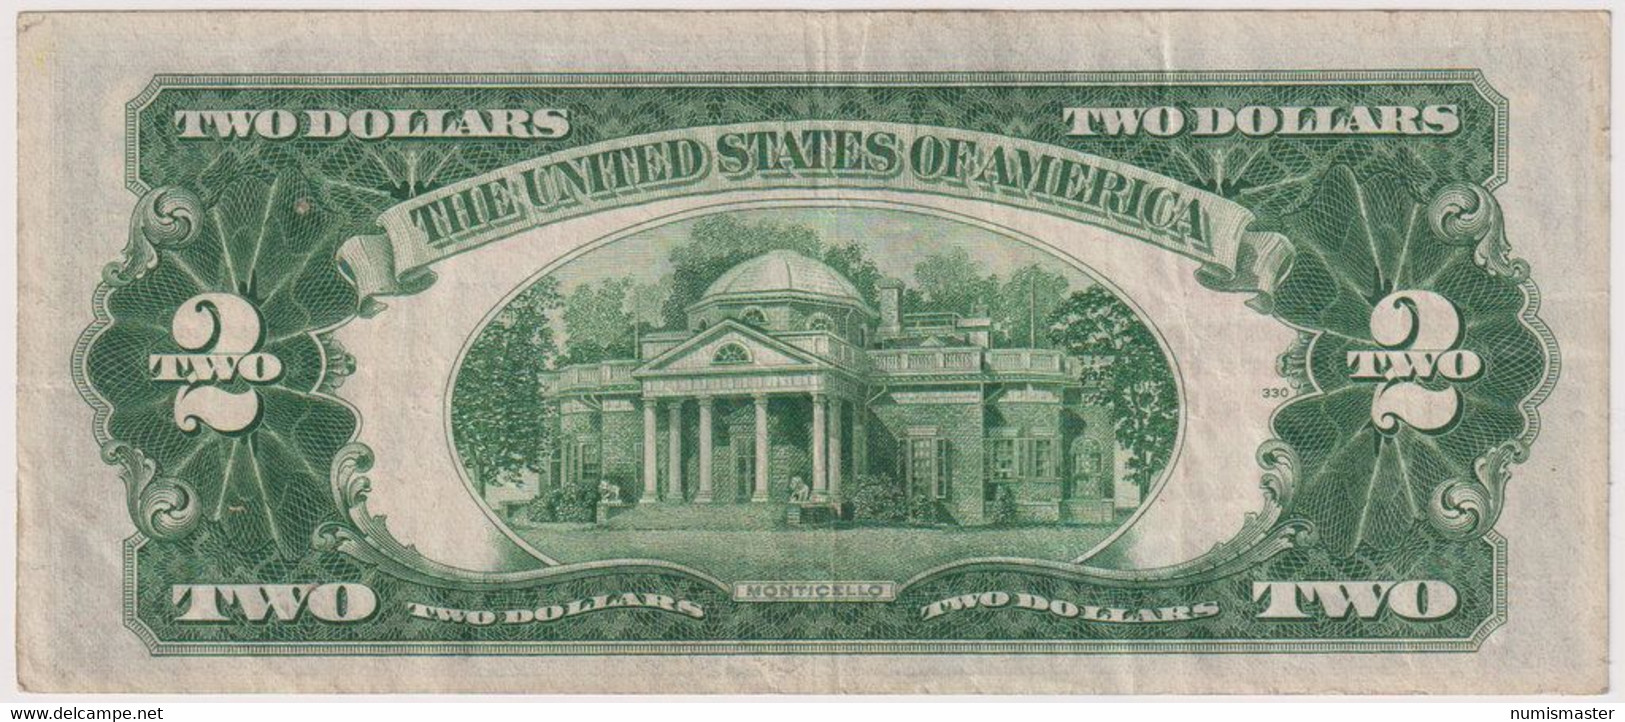 2 DOLLARS , U.S. NOTE SERIES 1928 F , RED SEAL - United States Notes (1928-1953)